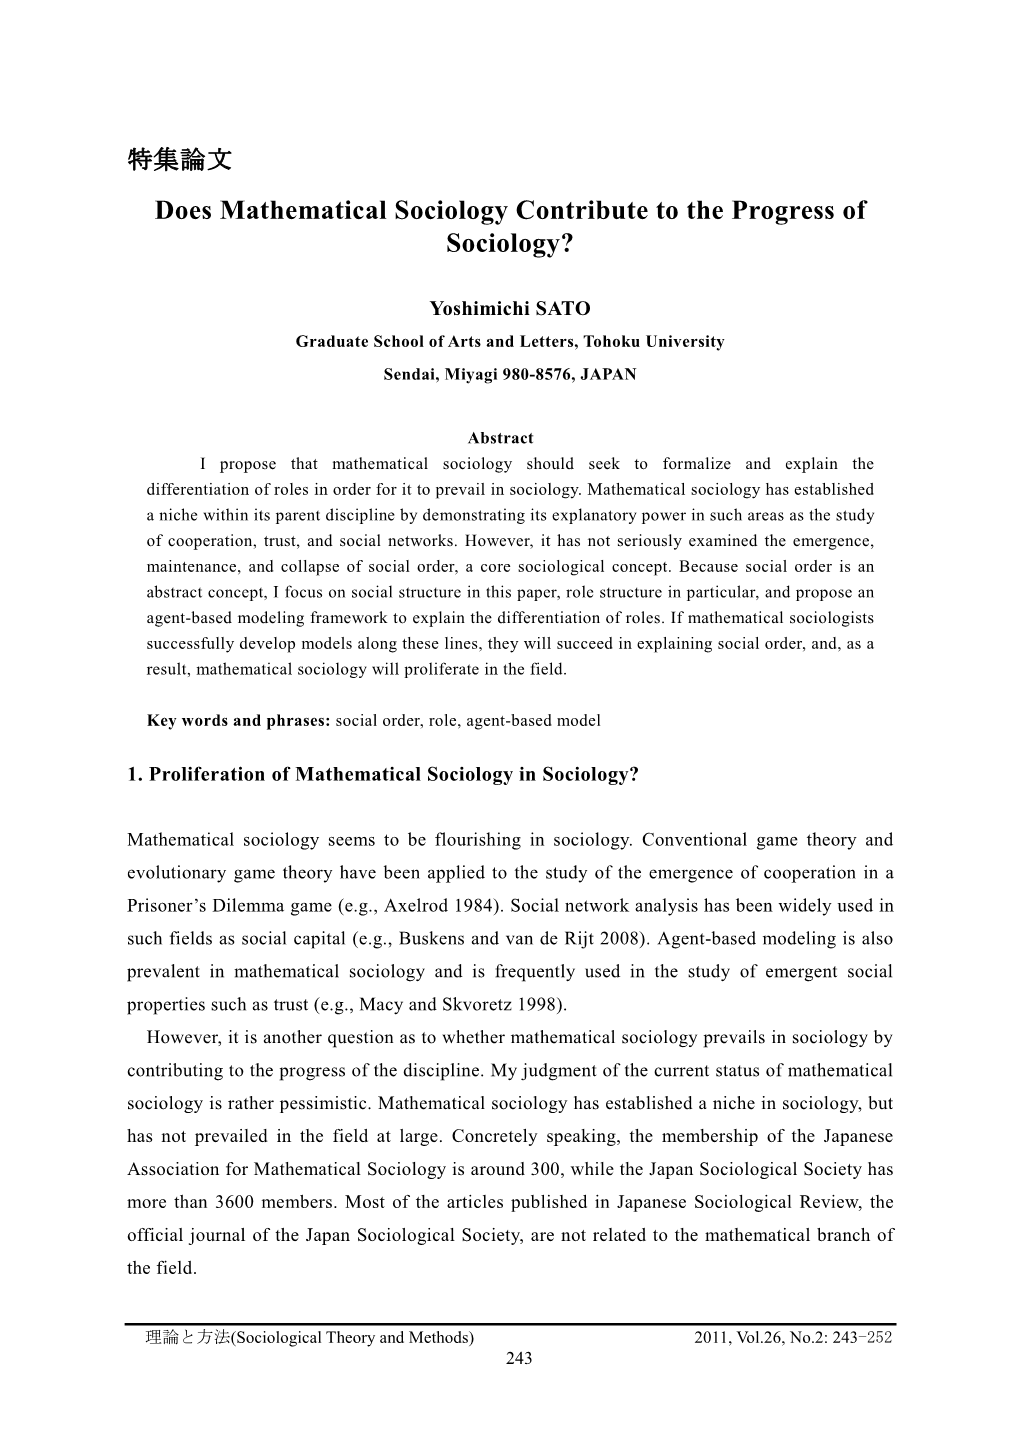 Does Mathematical Sociology Contribute to the Progress of Sociology?